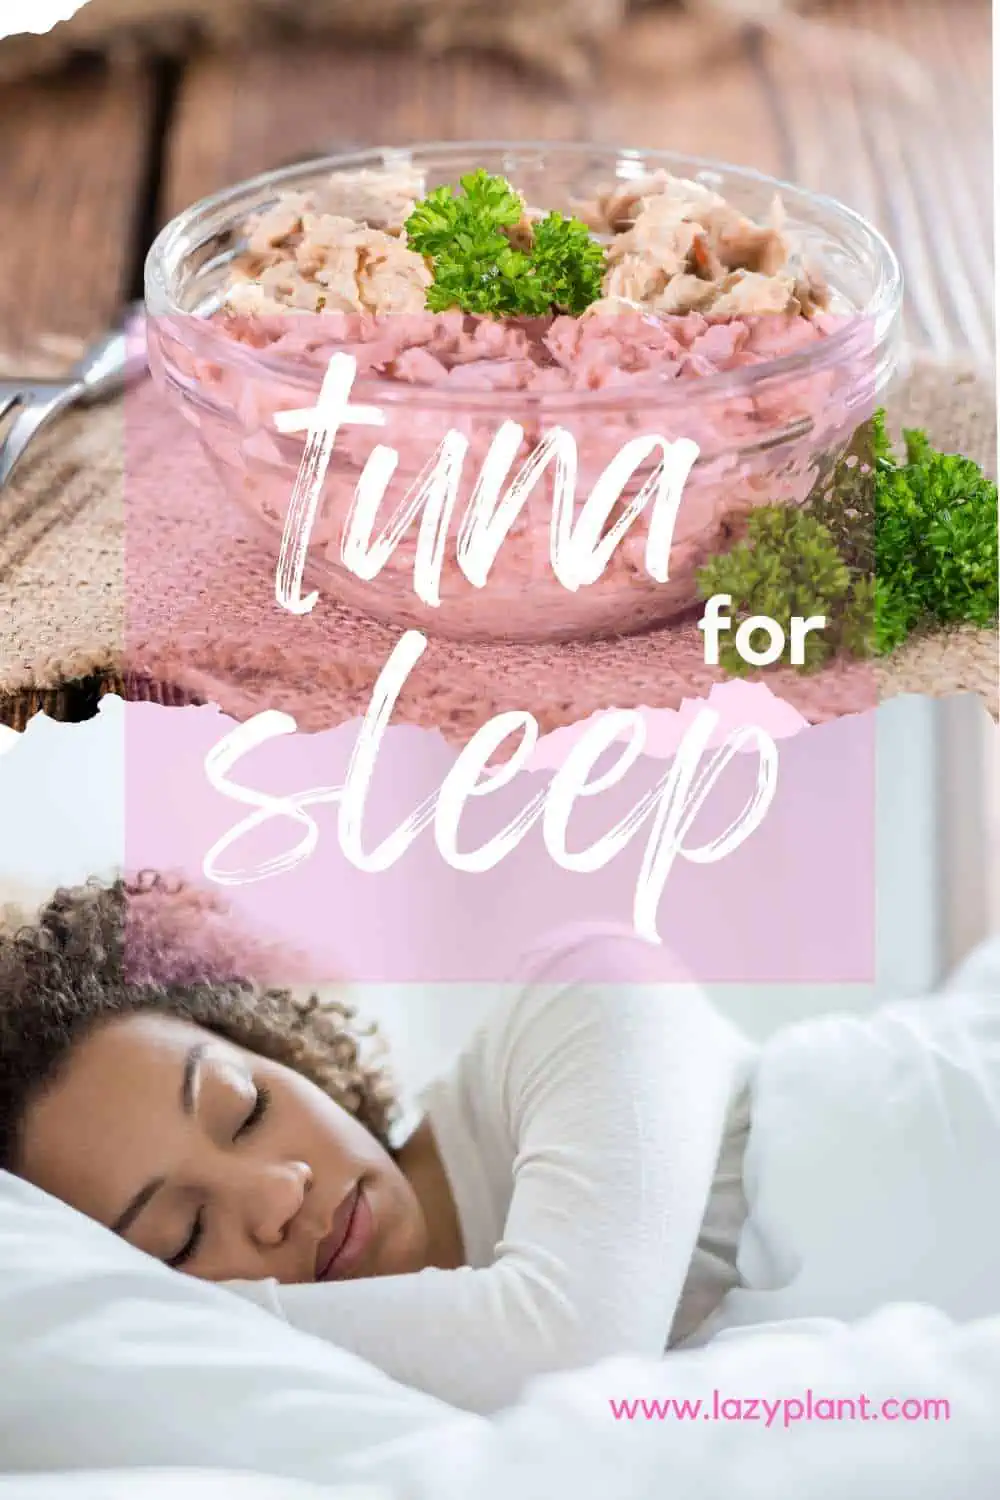 Tuna is beneficial for achieving a good night's sleep when eaten at dinner.